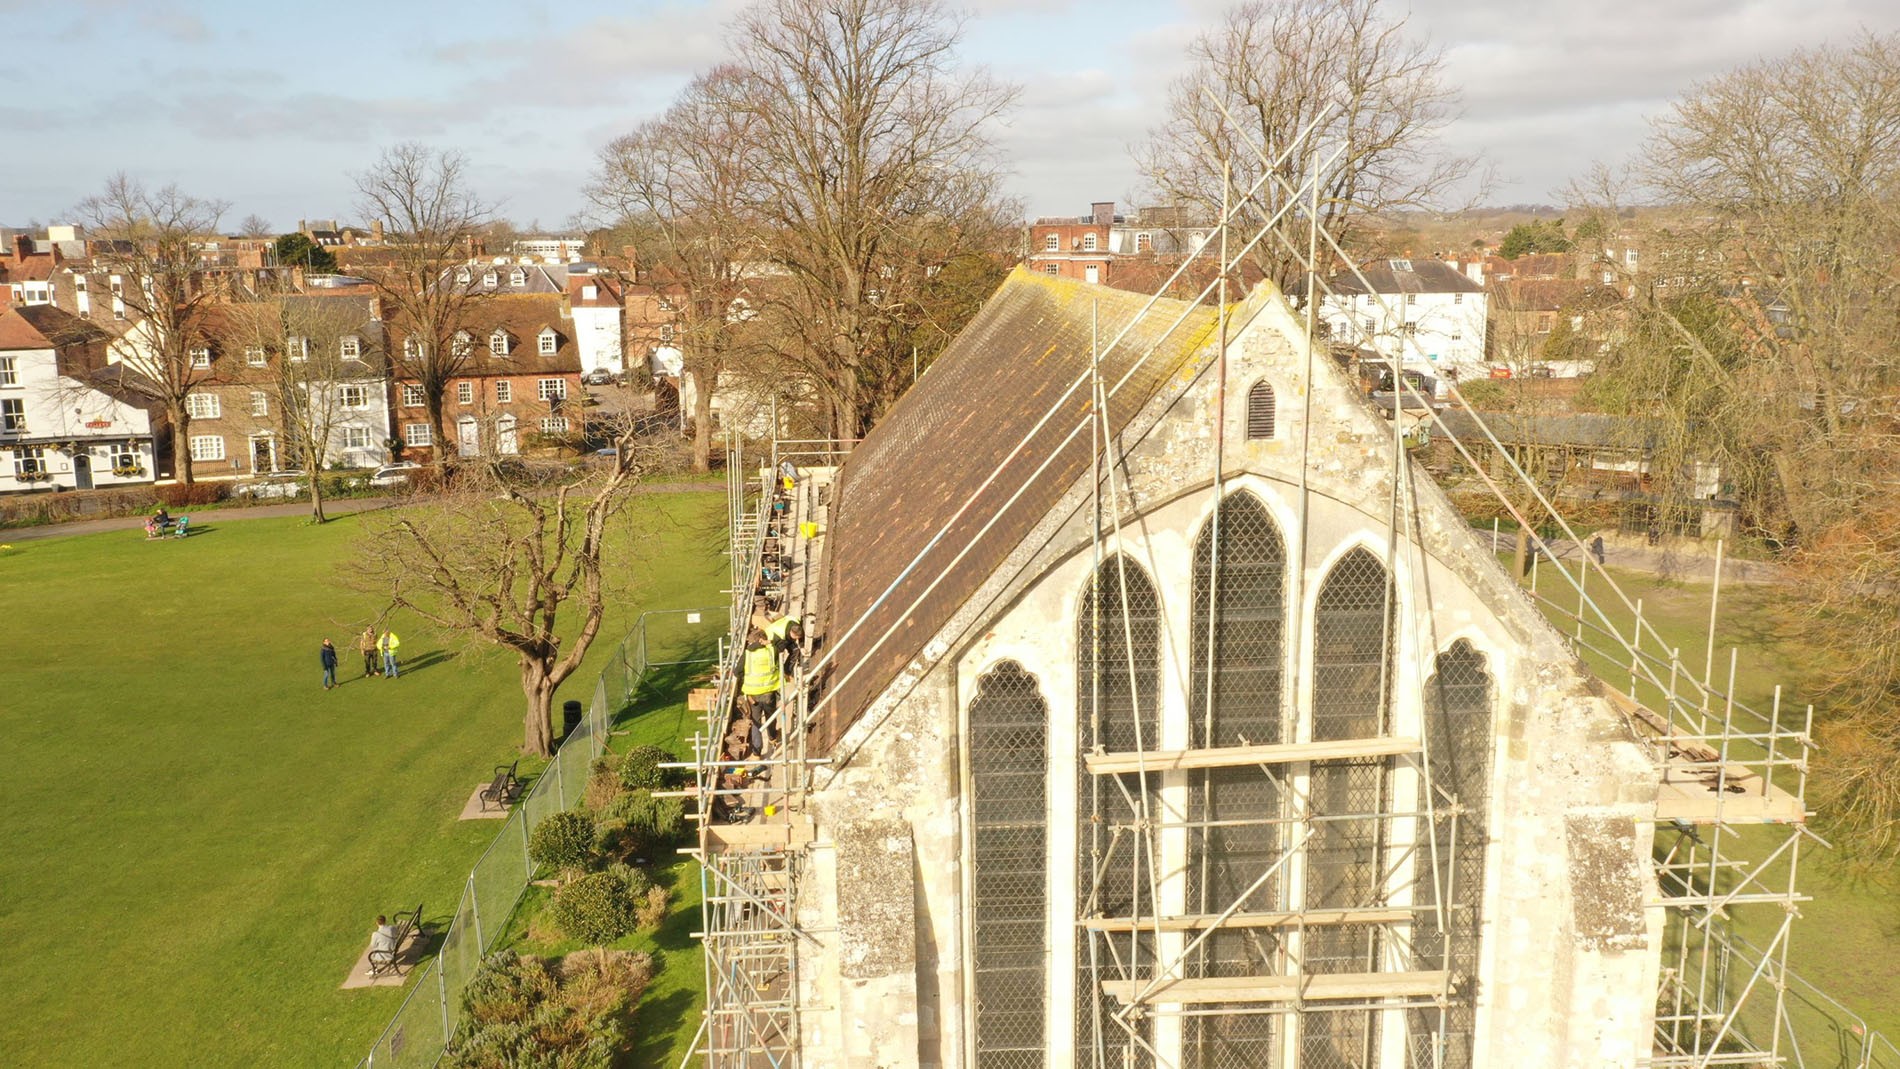 County Gutters Case Study Chichester Guildhall 22-17102022035849.jpg